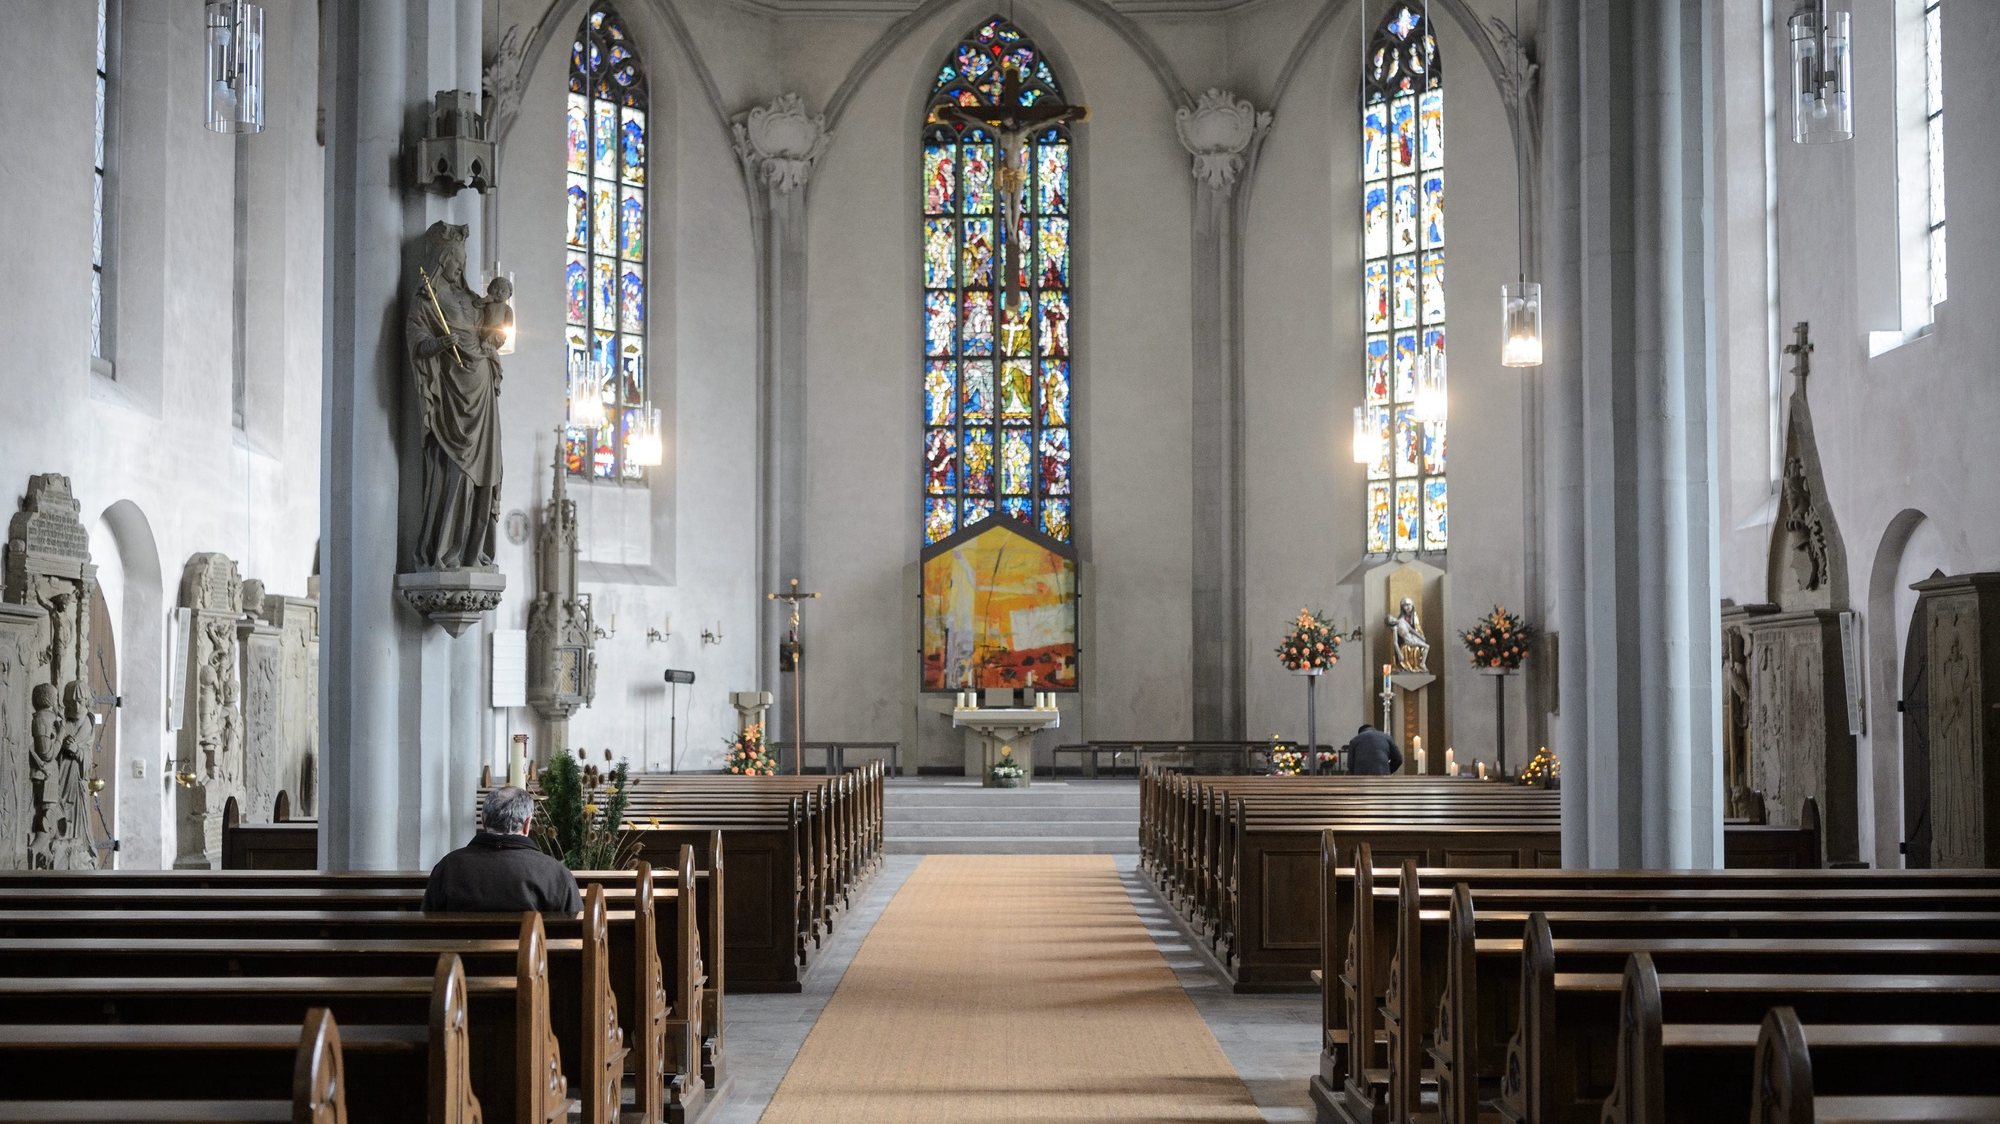 epa05763021 View of the interior of the Pilgrimage Church of Maria Sondheim in Arnstein near Wuerzburg, Germany, 31 January 2017. On early 29 January, six teenagers aged 18 to 19, including the arbour owner&#039;s two children, were found dead in the garden hut in which they held a private party. According to police, the cause of death is a suspected carbon monoxide poisoning. At the church a mourning place was installed where people can leave flowers, light candles or commemorate the dead teenagers.  EPA/DANIEL PETER